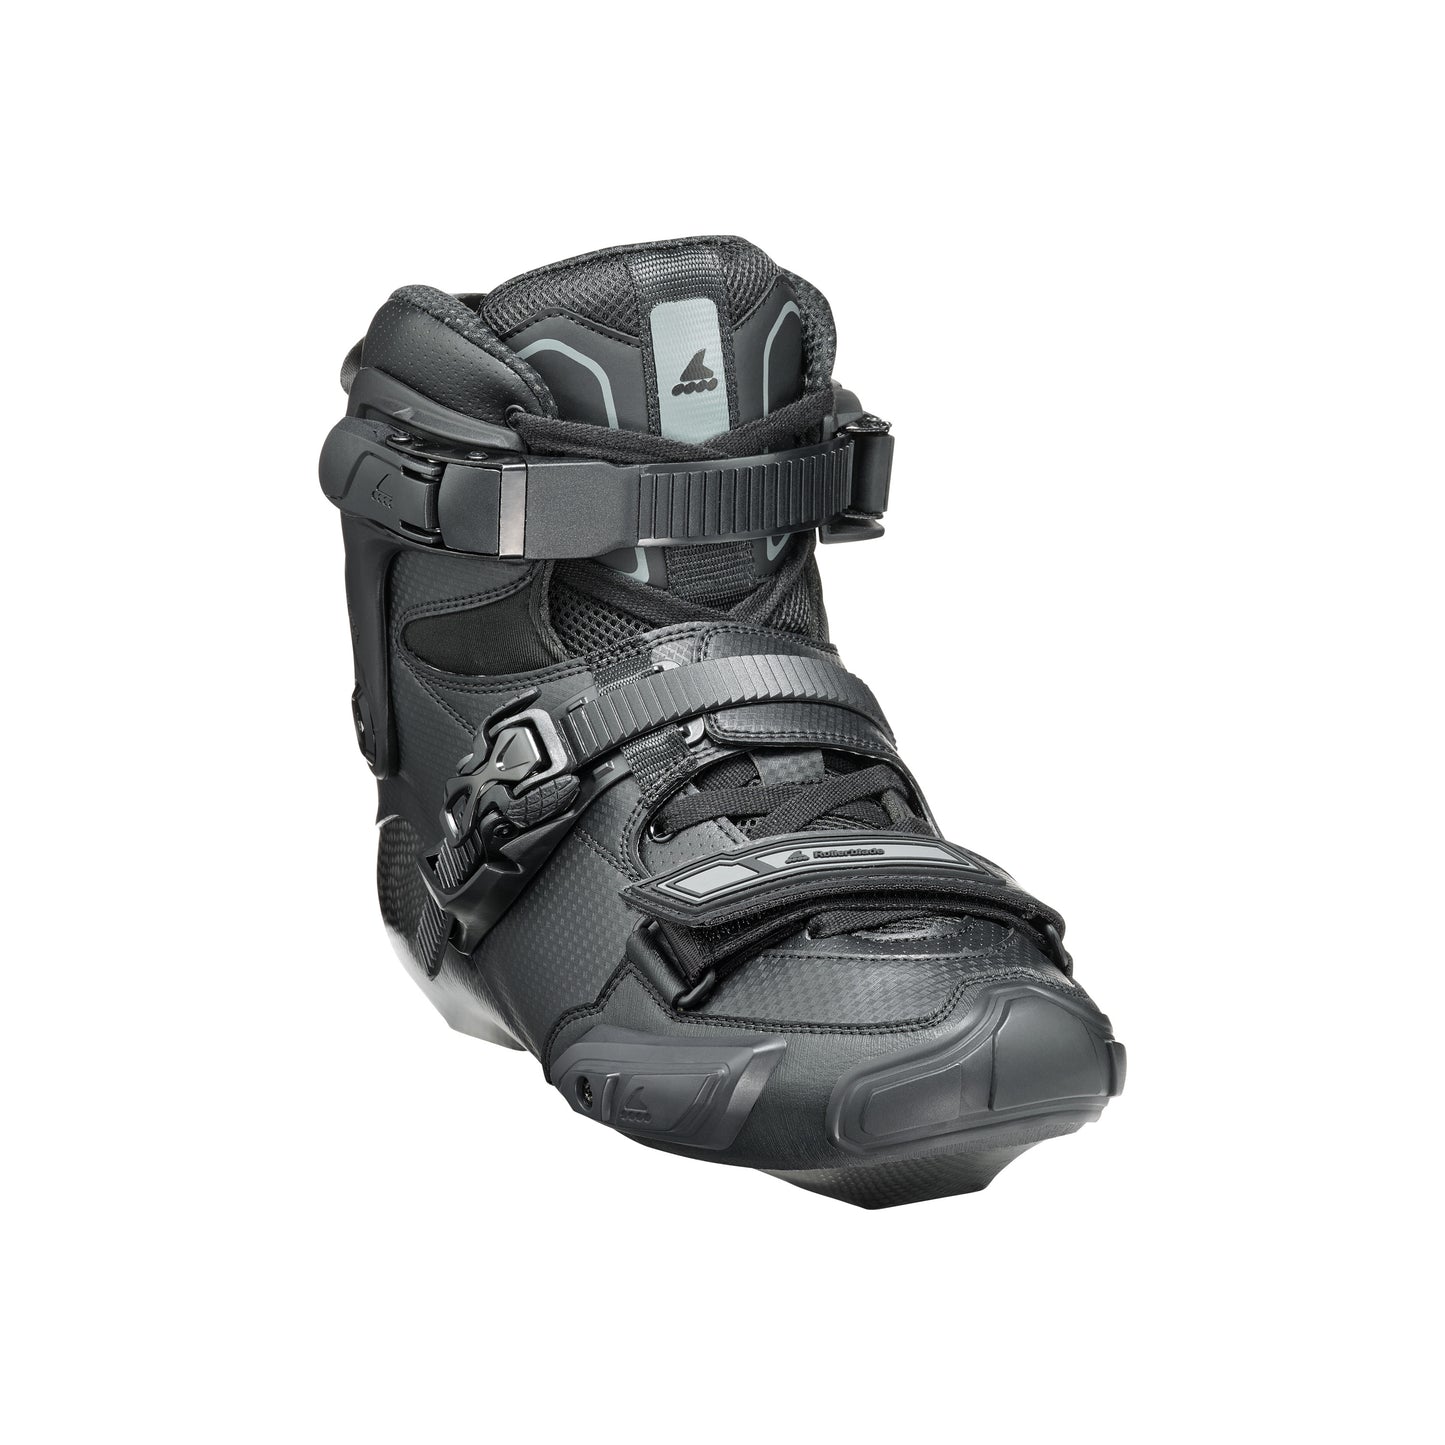 Rollerblade Crossfire Boot